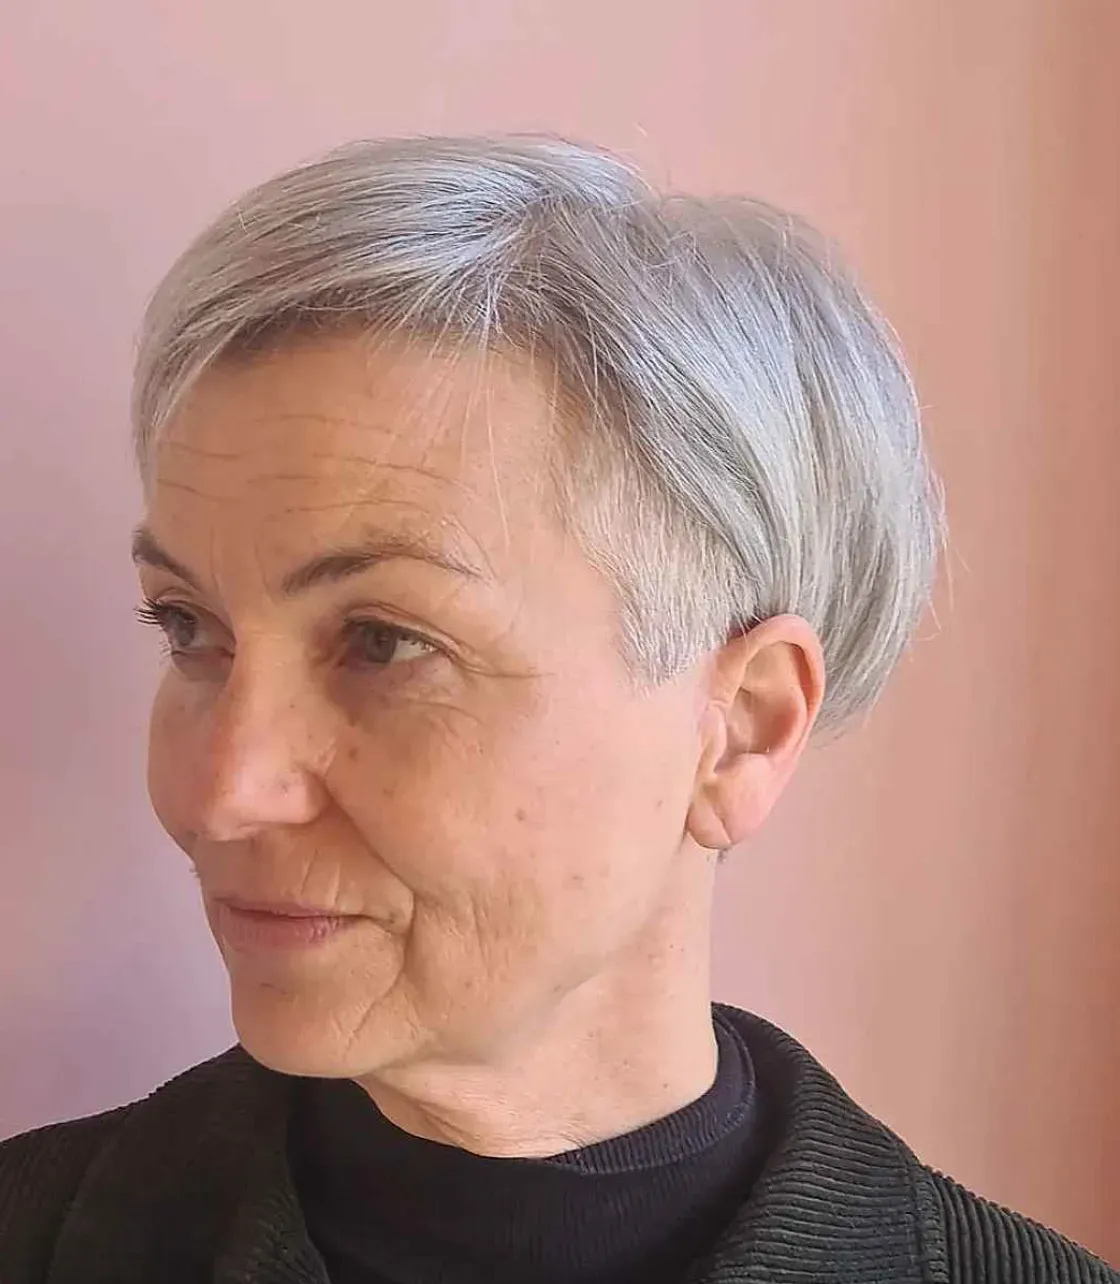 best pixie haircuts for older ladies